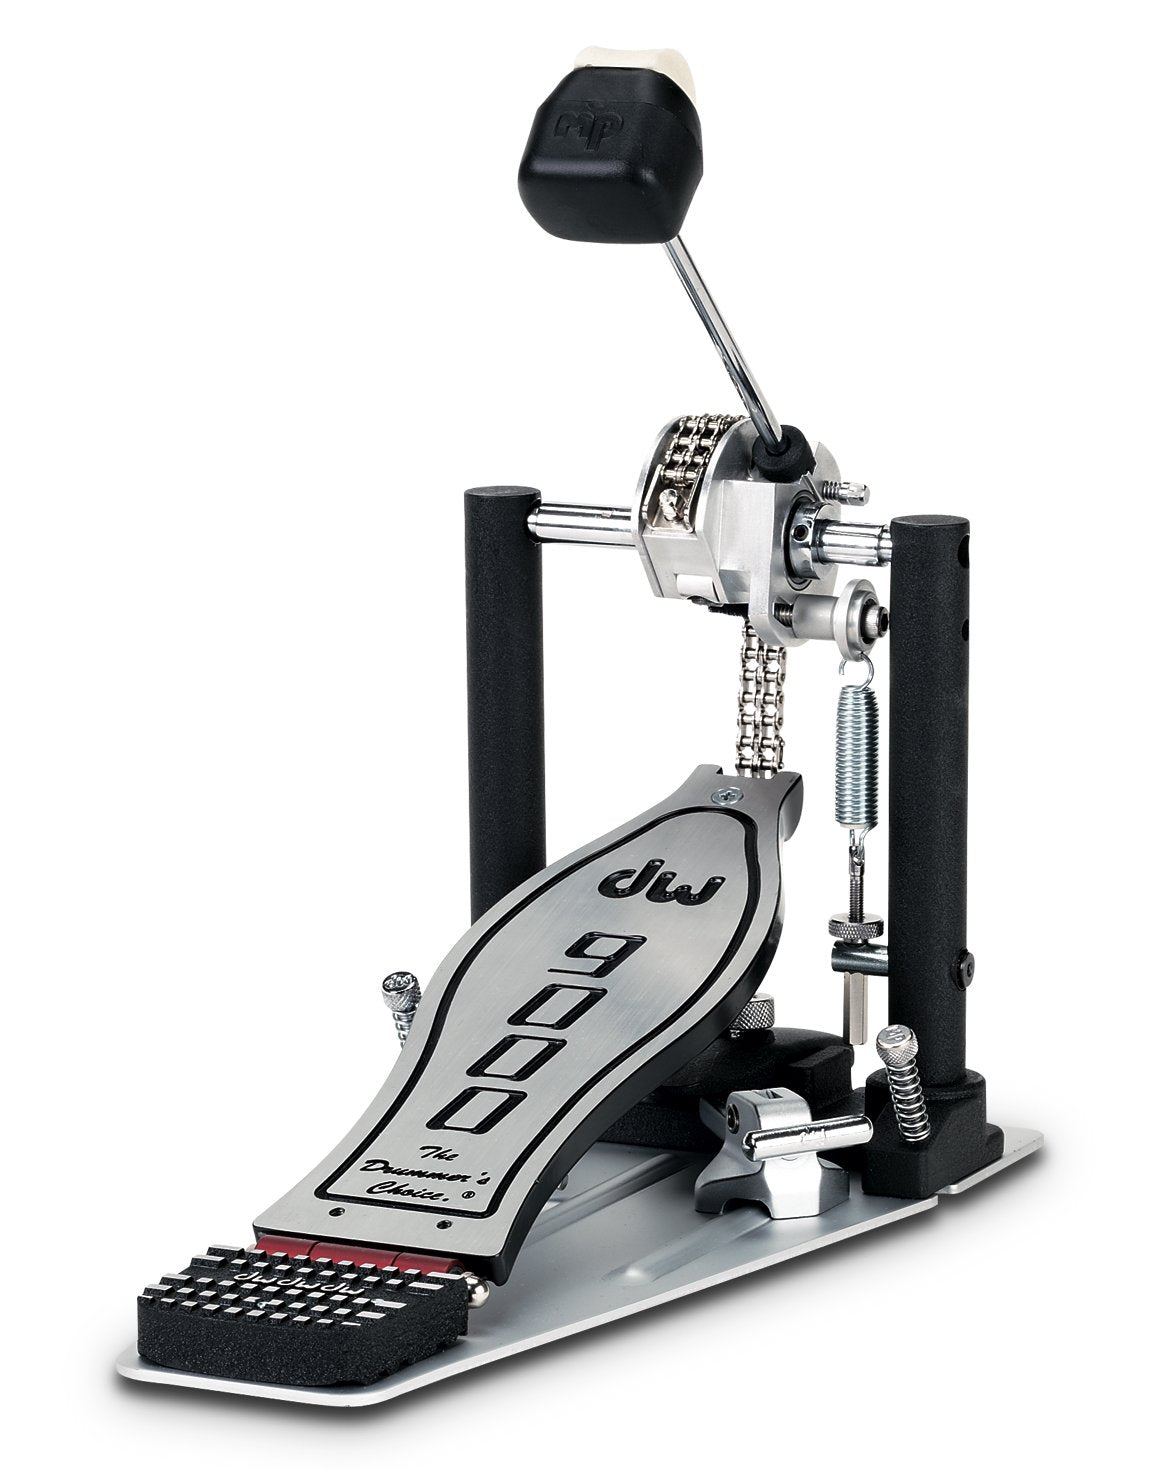 DW 9002 Double Drum Pedal - Grass Roots Music Store